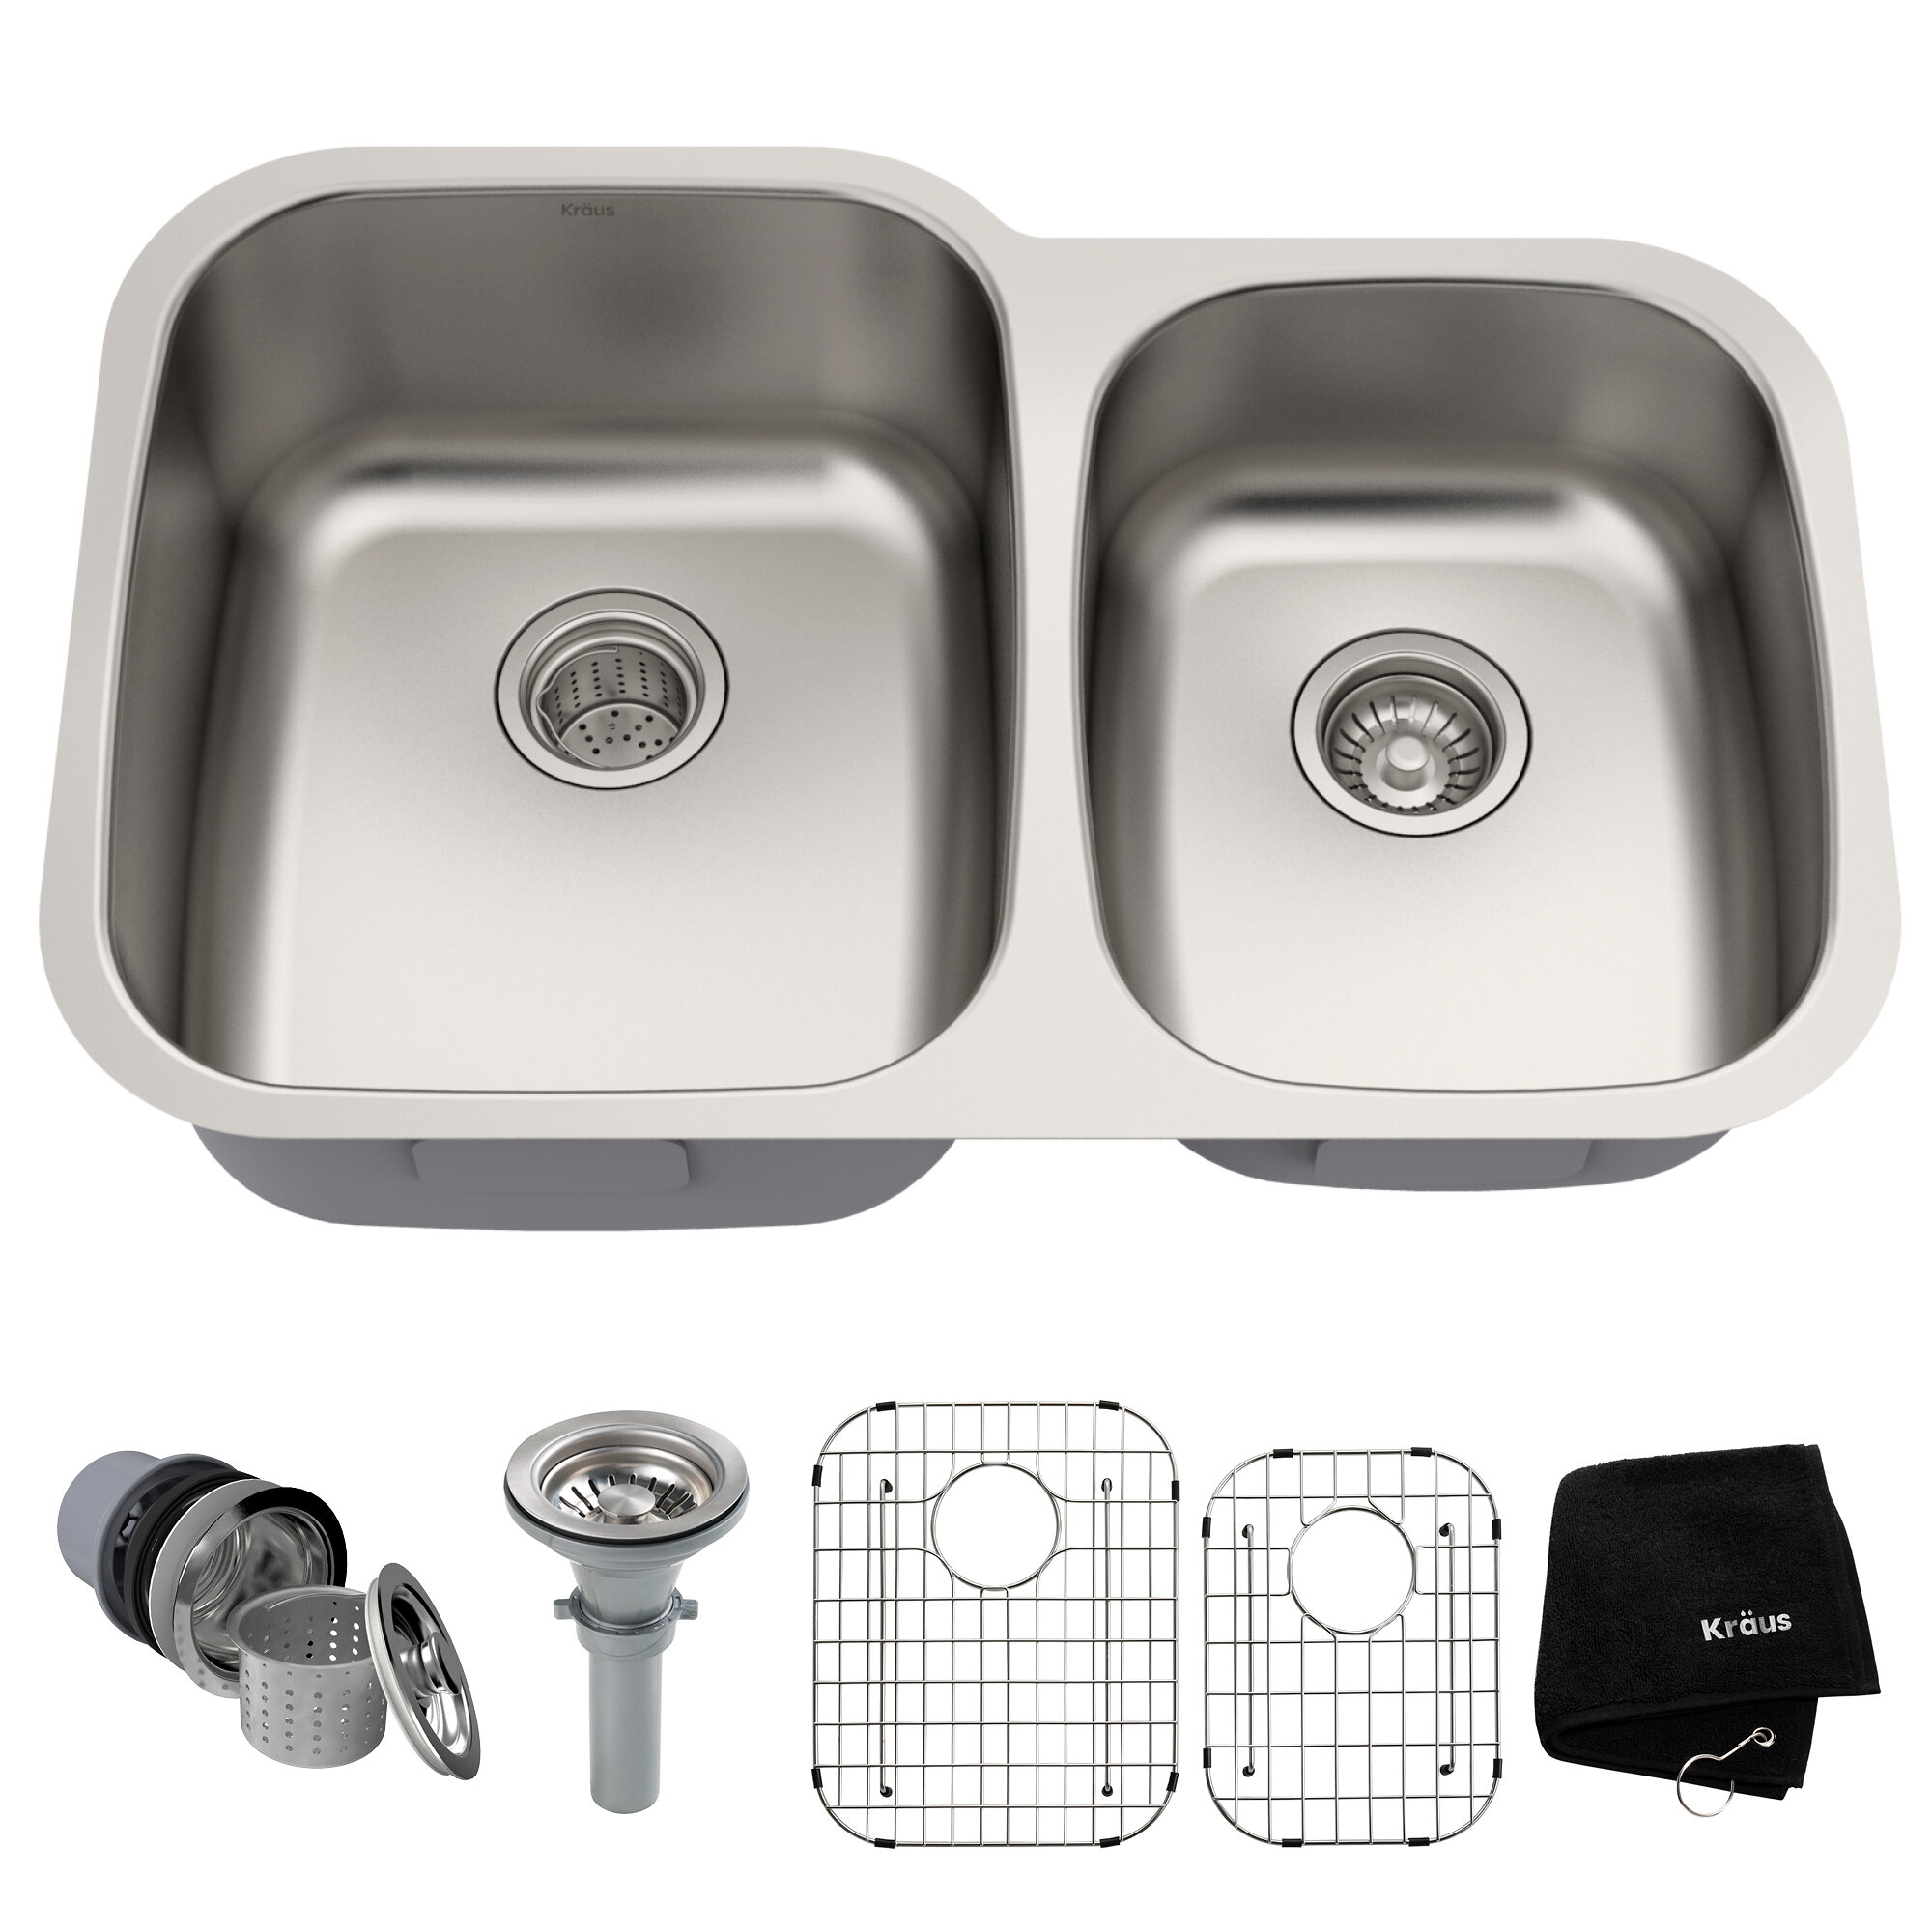 32 L X 21 W Double Basin Undermount Kitchen Sink With Drain Assembly